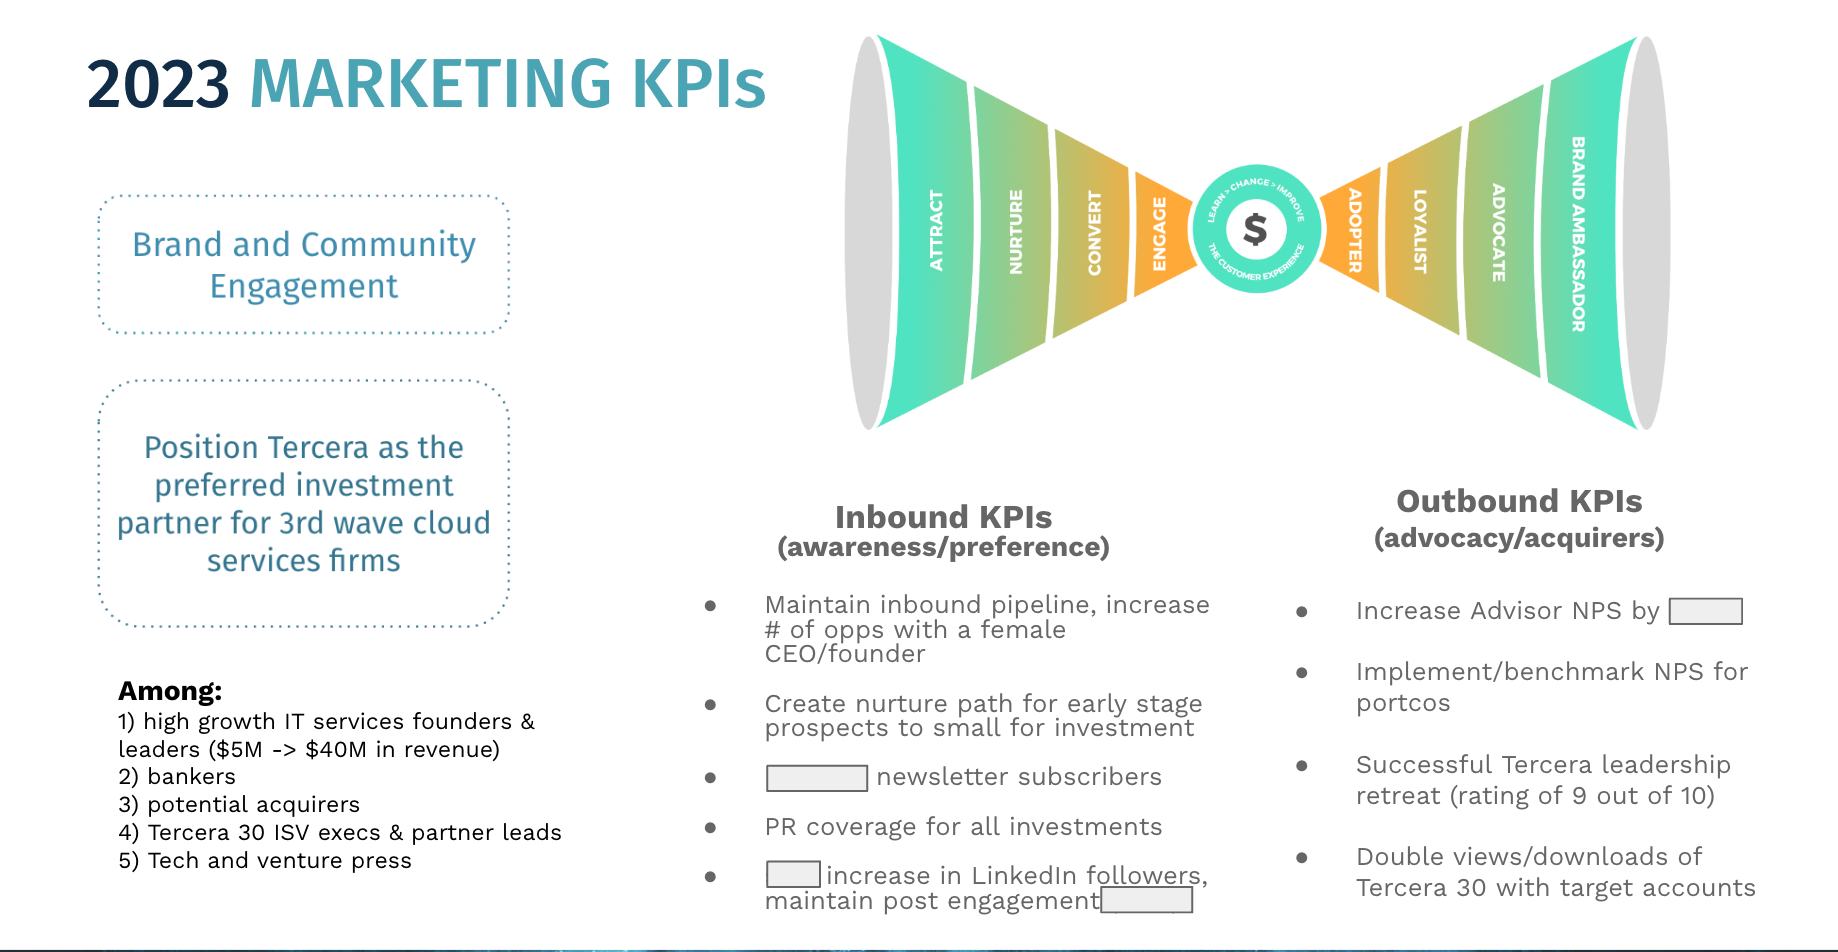 Examples of marketing KPIs